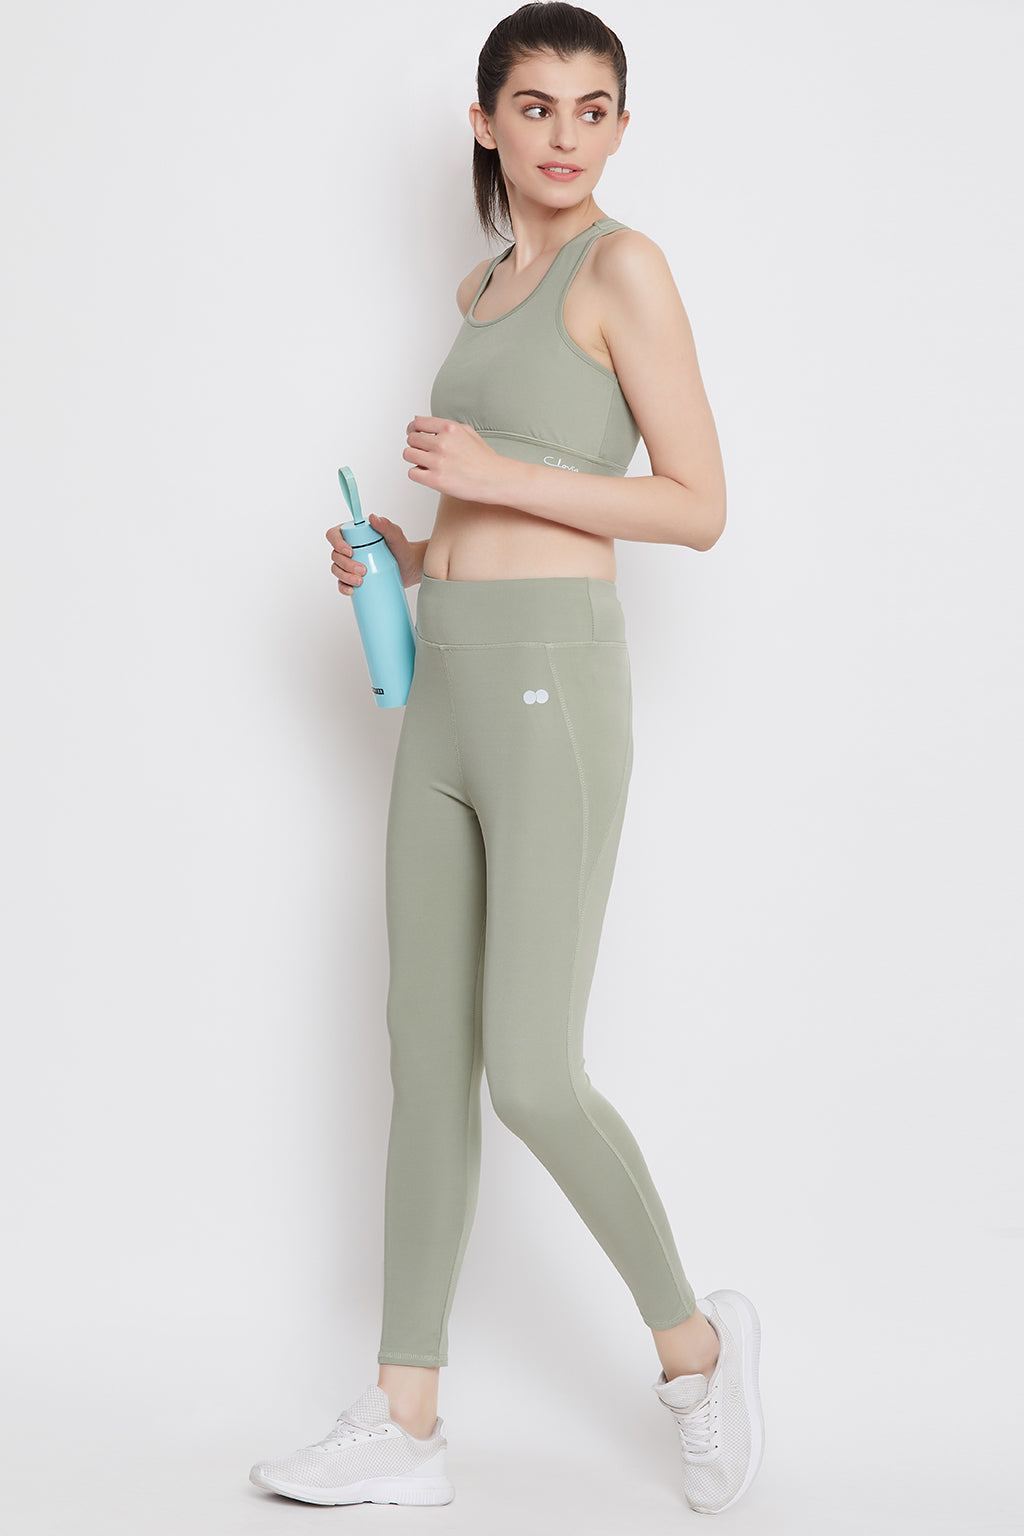 Green Activewear Ankle Length Tights in Sage